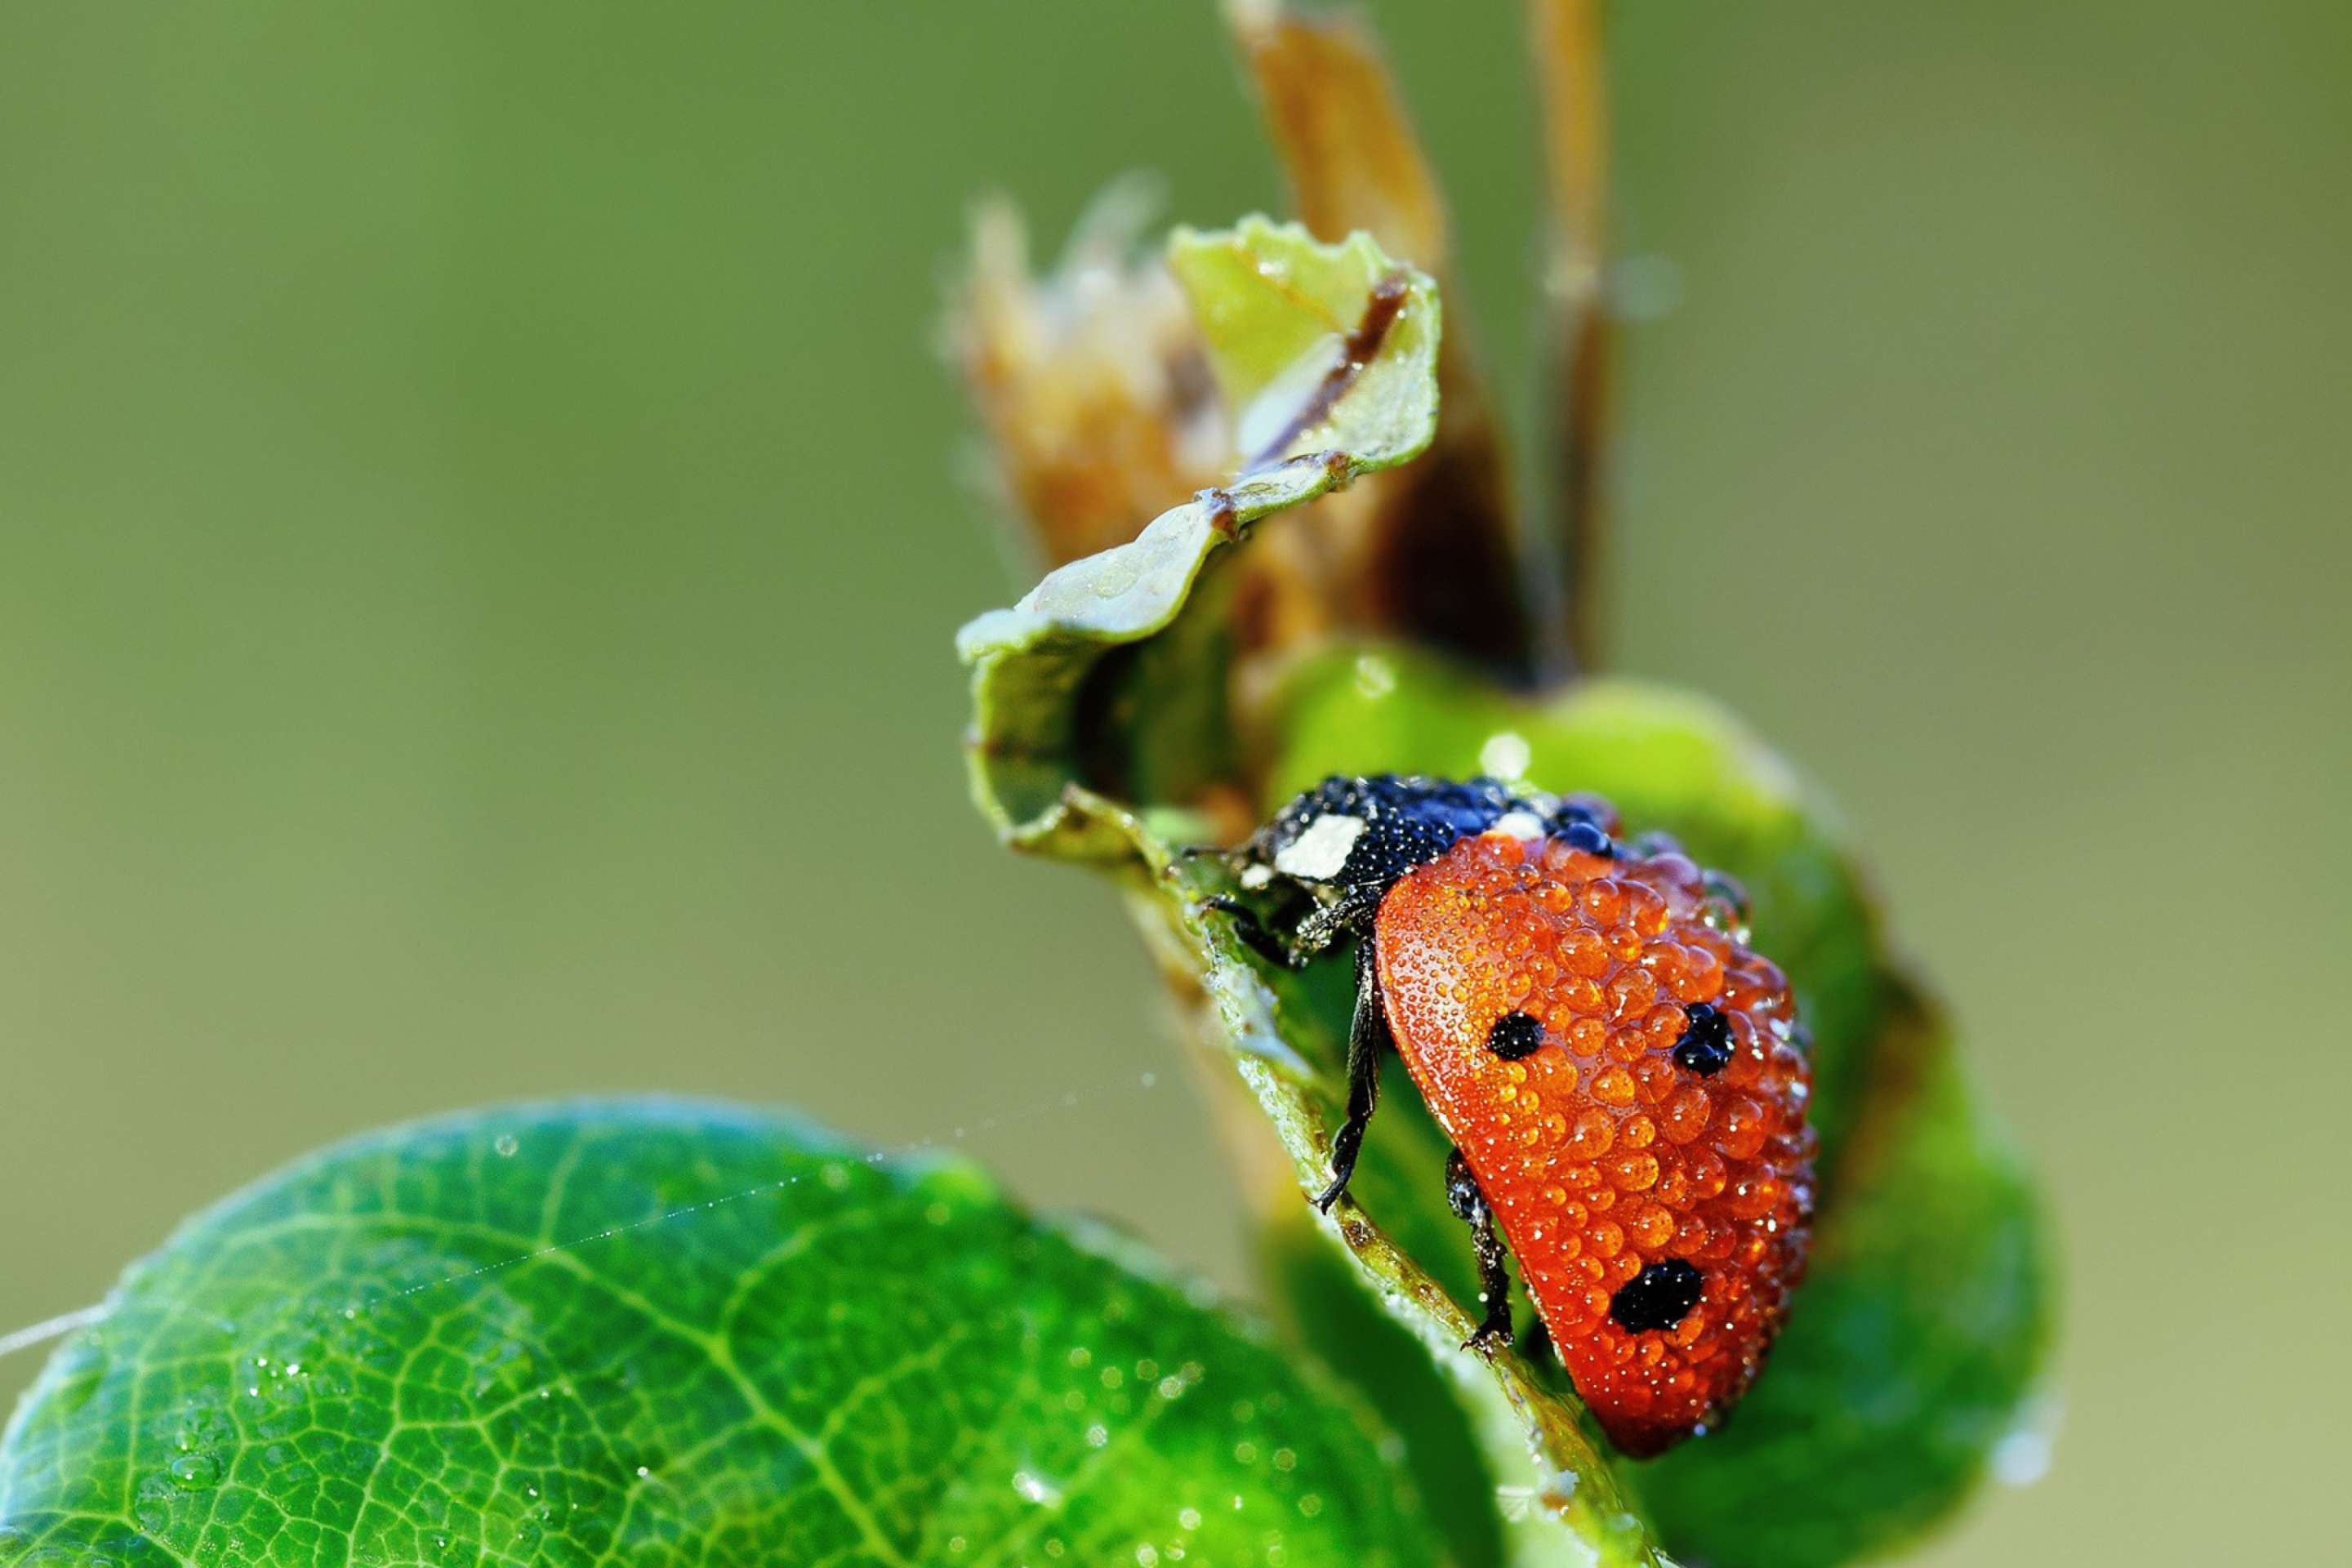 Ladybug Covered With Dew Drops wallpaper 2880x1920